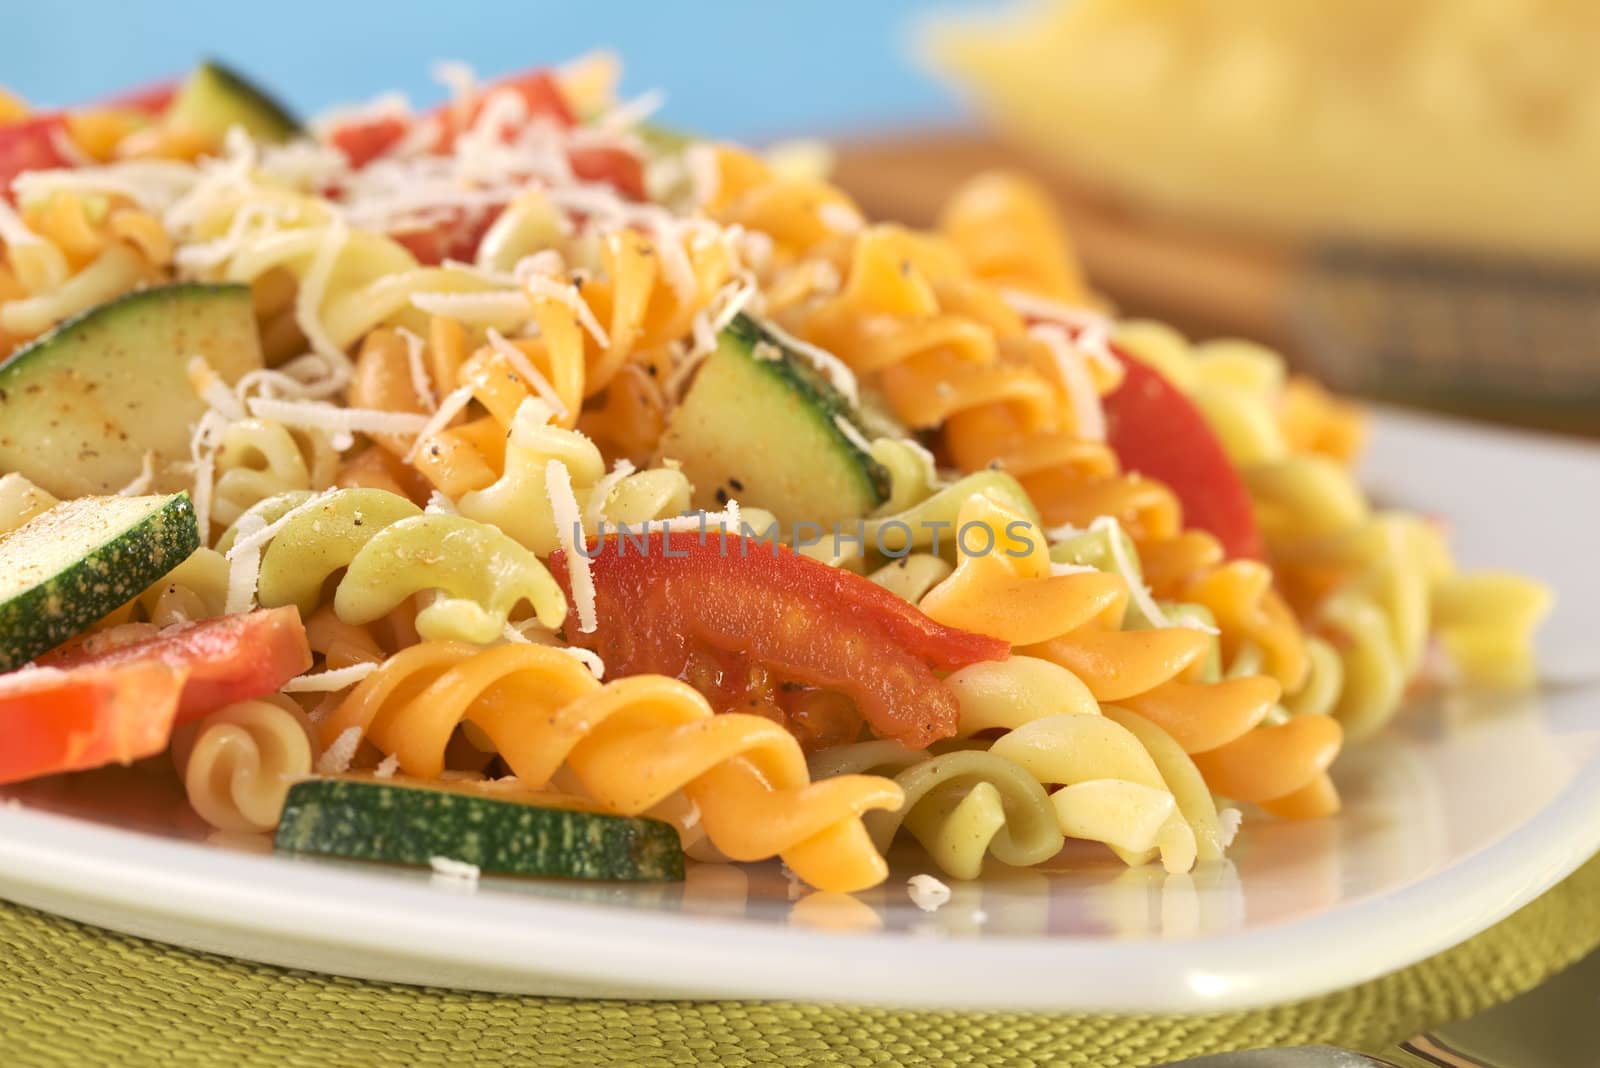 Colorful fusilli pasta with zucchini, tomato and grated cheese (Selective Focus, Focus on the tomato in front)